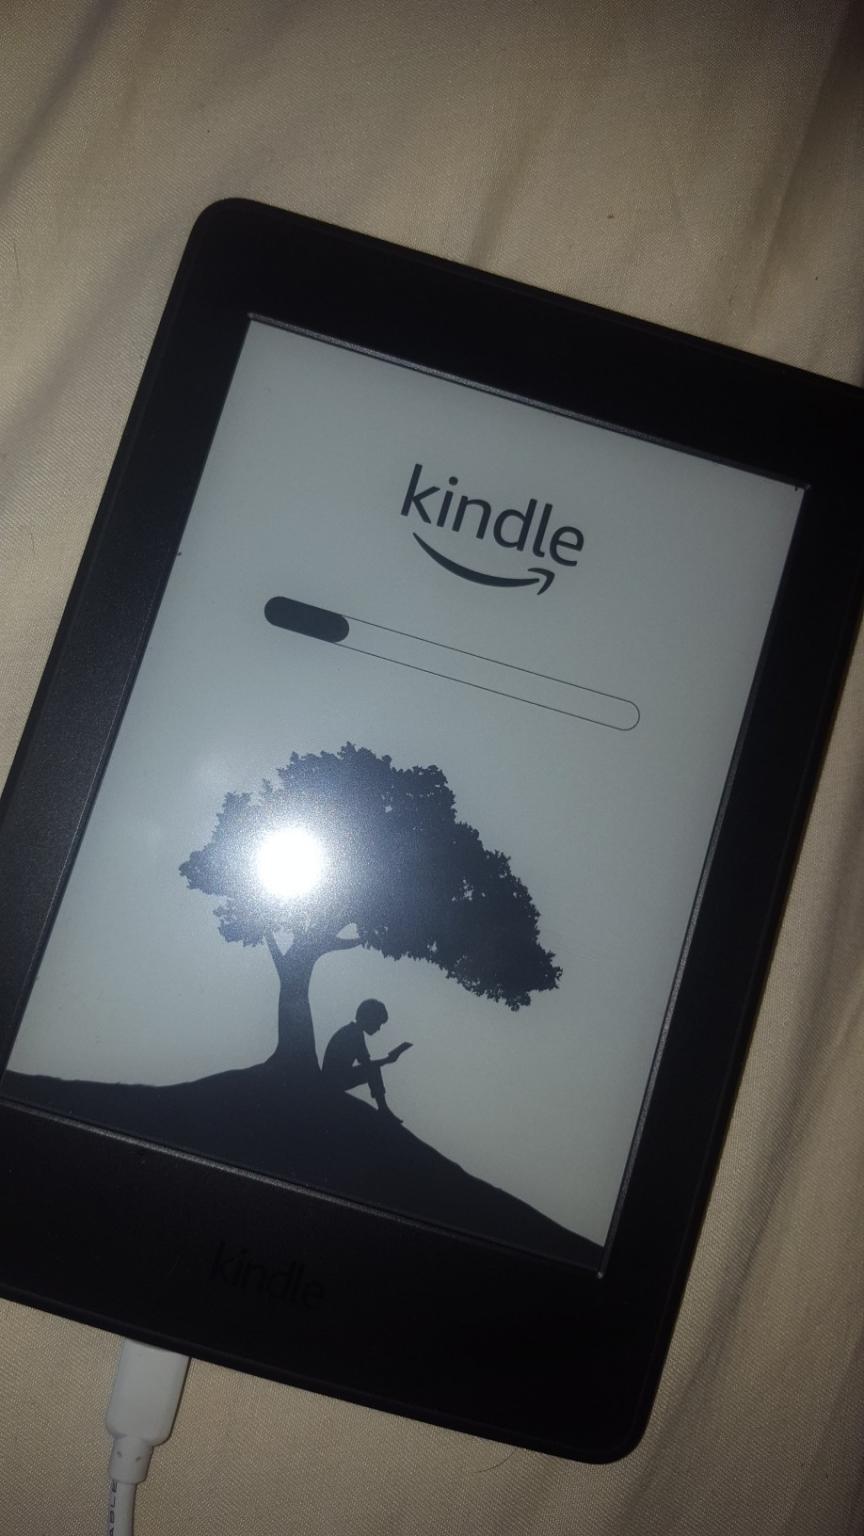 kindle paper white in B68 Sandwell for £40.00 for sale - Shpock